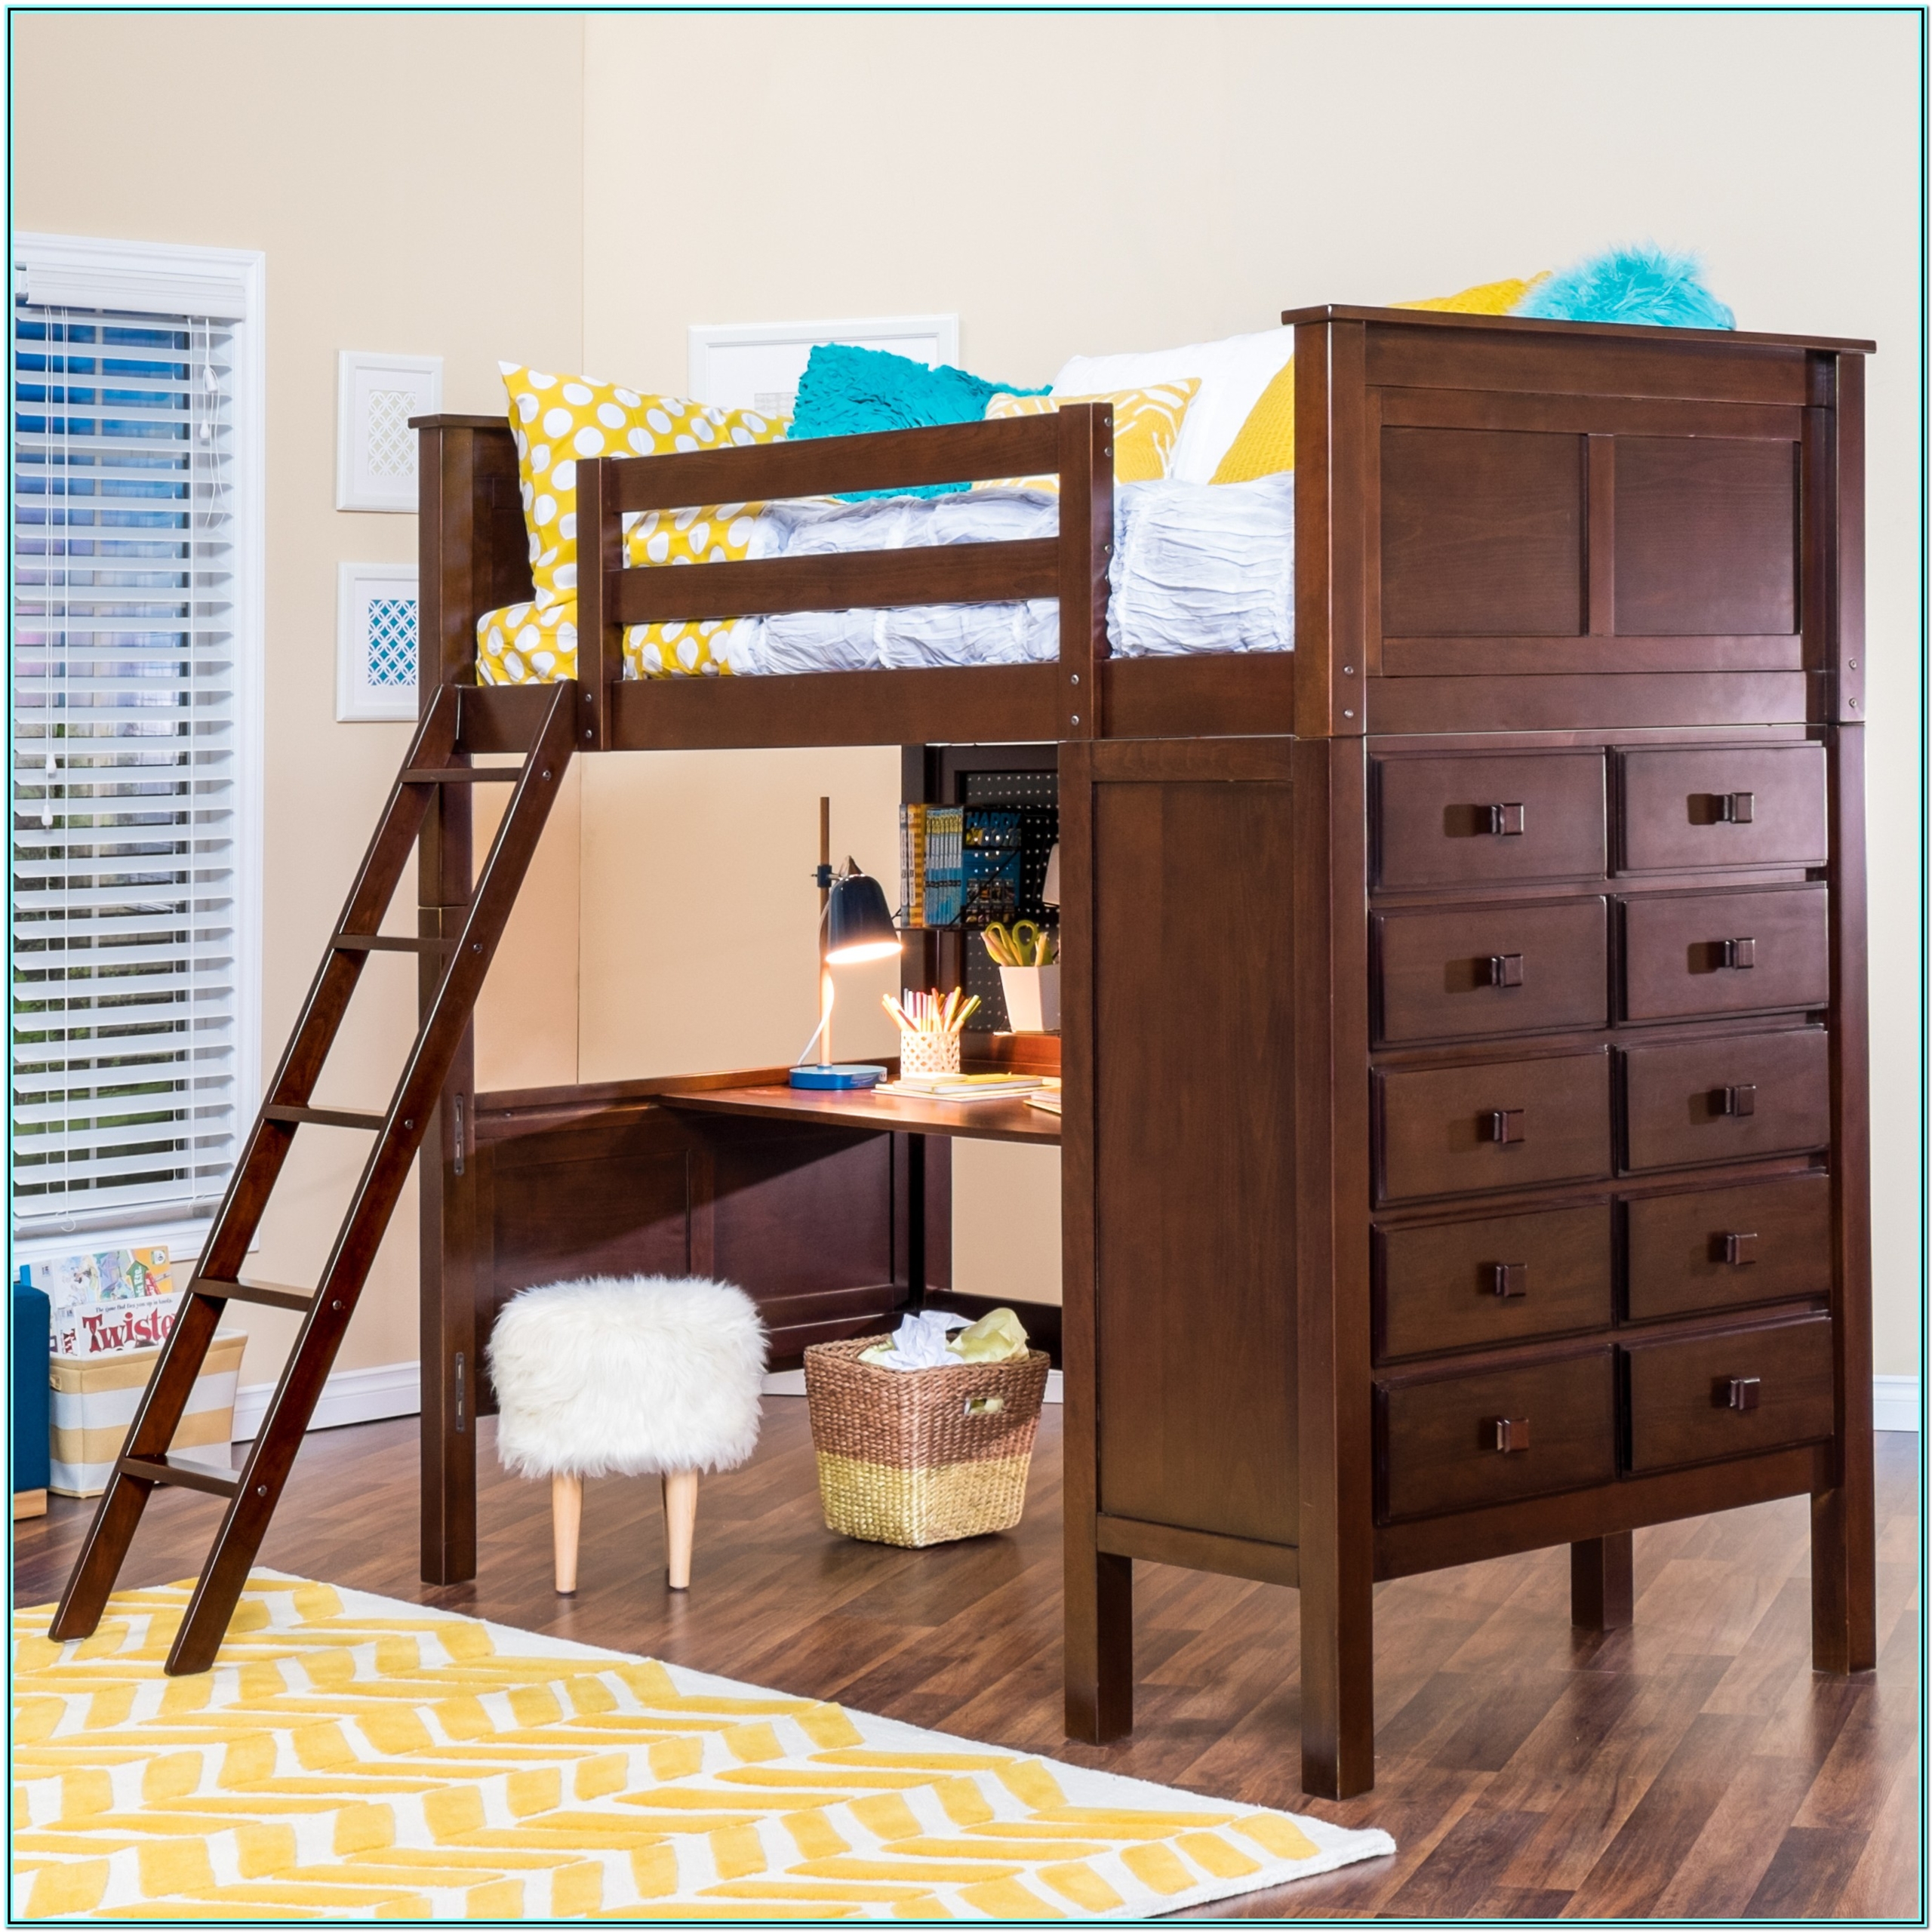 Bunk Beds With Dressers Visualhunt, Epoch Design Bunk Beds